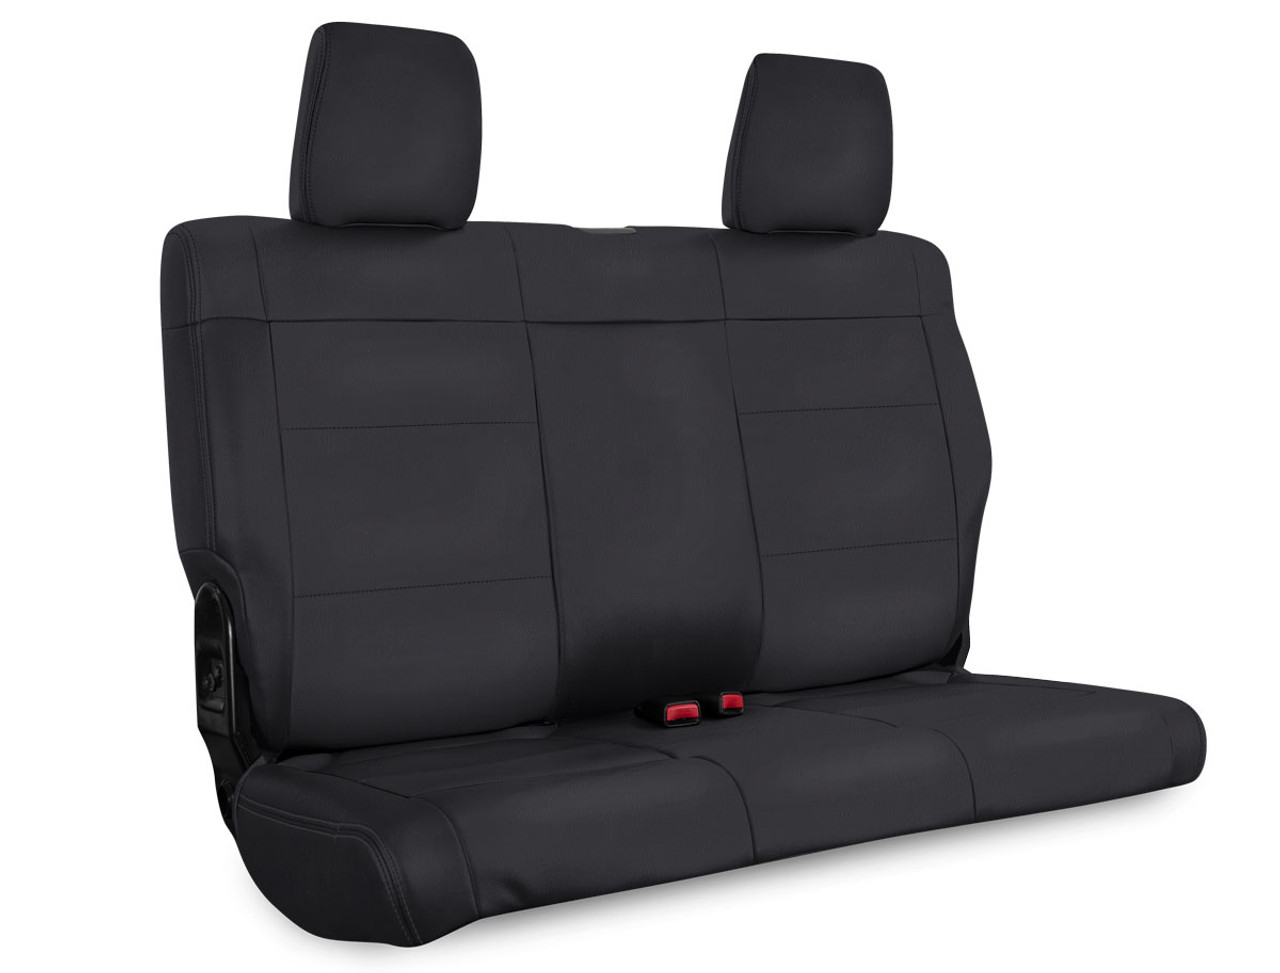 Rear Seat Cover for '07'10 Jeep Wrangler JK, 2 door - All Black